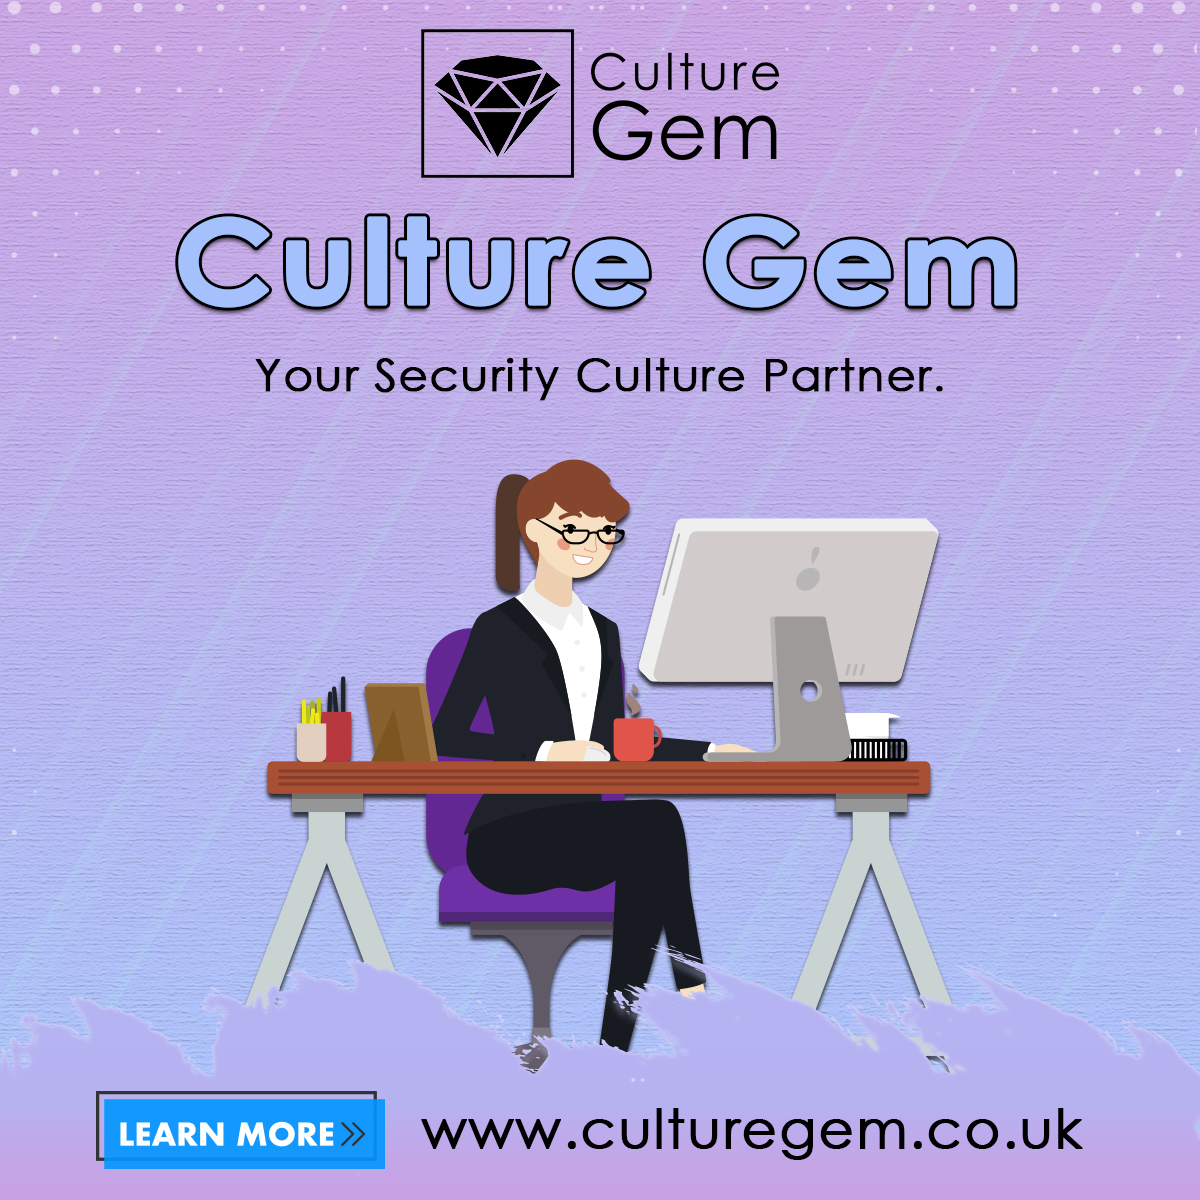 Culture Gem, experts in security culture and behavior change, place people and culture at the core of security. We work with diverse clients to enhance security policies, processes, and culture, all while ensuring successful project outcomes and safety. 
#SecurityAwareness #Cyber